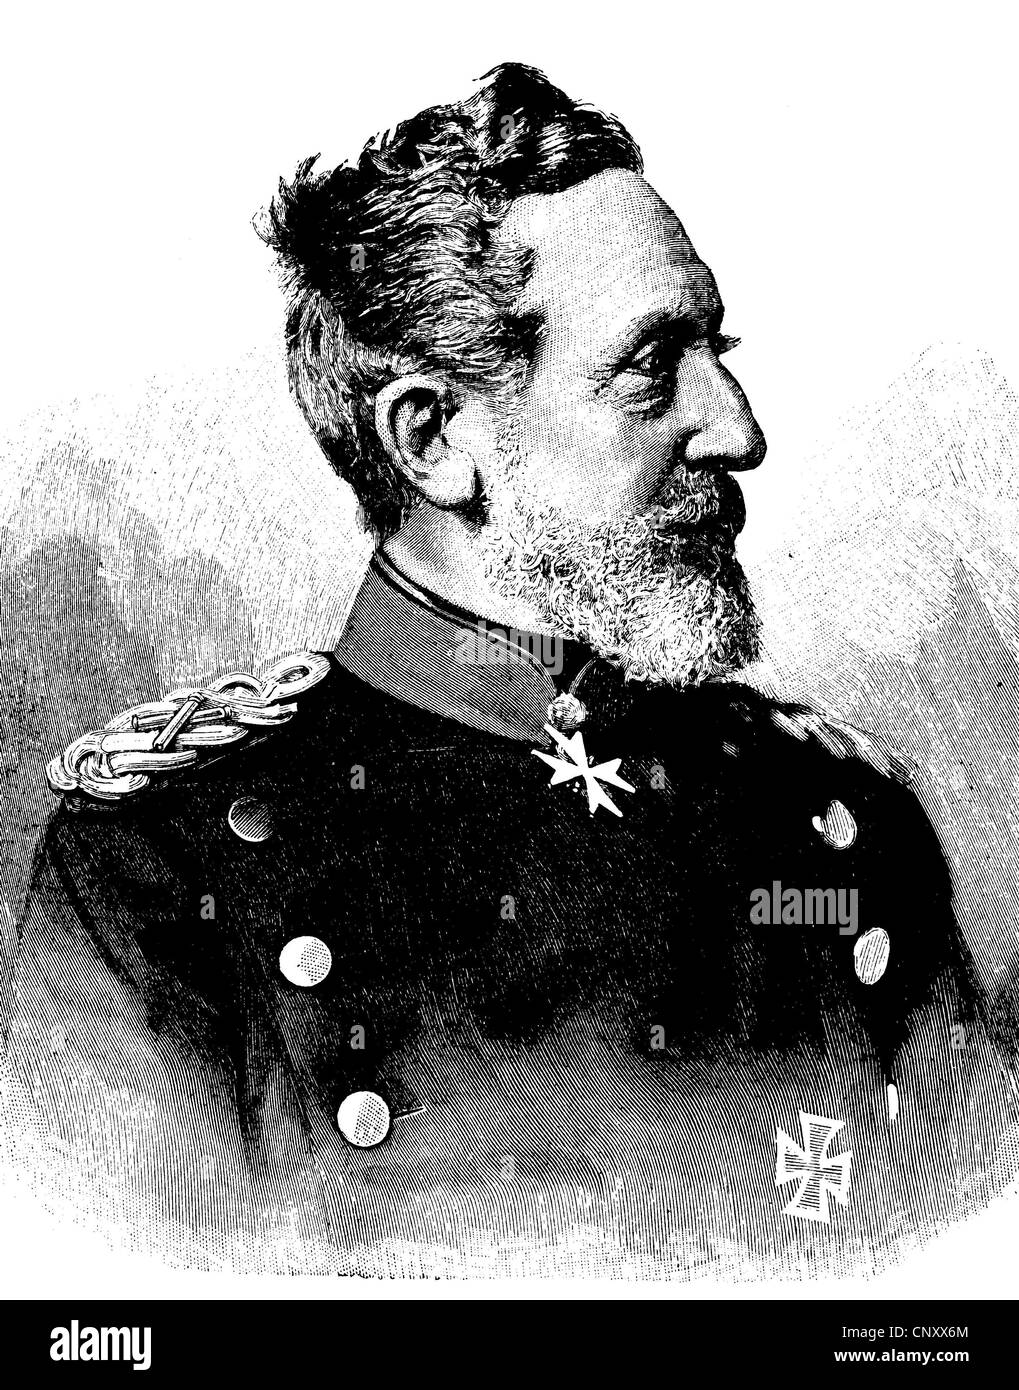 Leonhard Graf von Blumenthal, 1810 - 1900, a Prussian Field Marshal, historic wood engraving, about 1897 Stock Photo